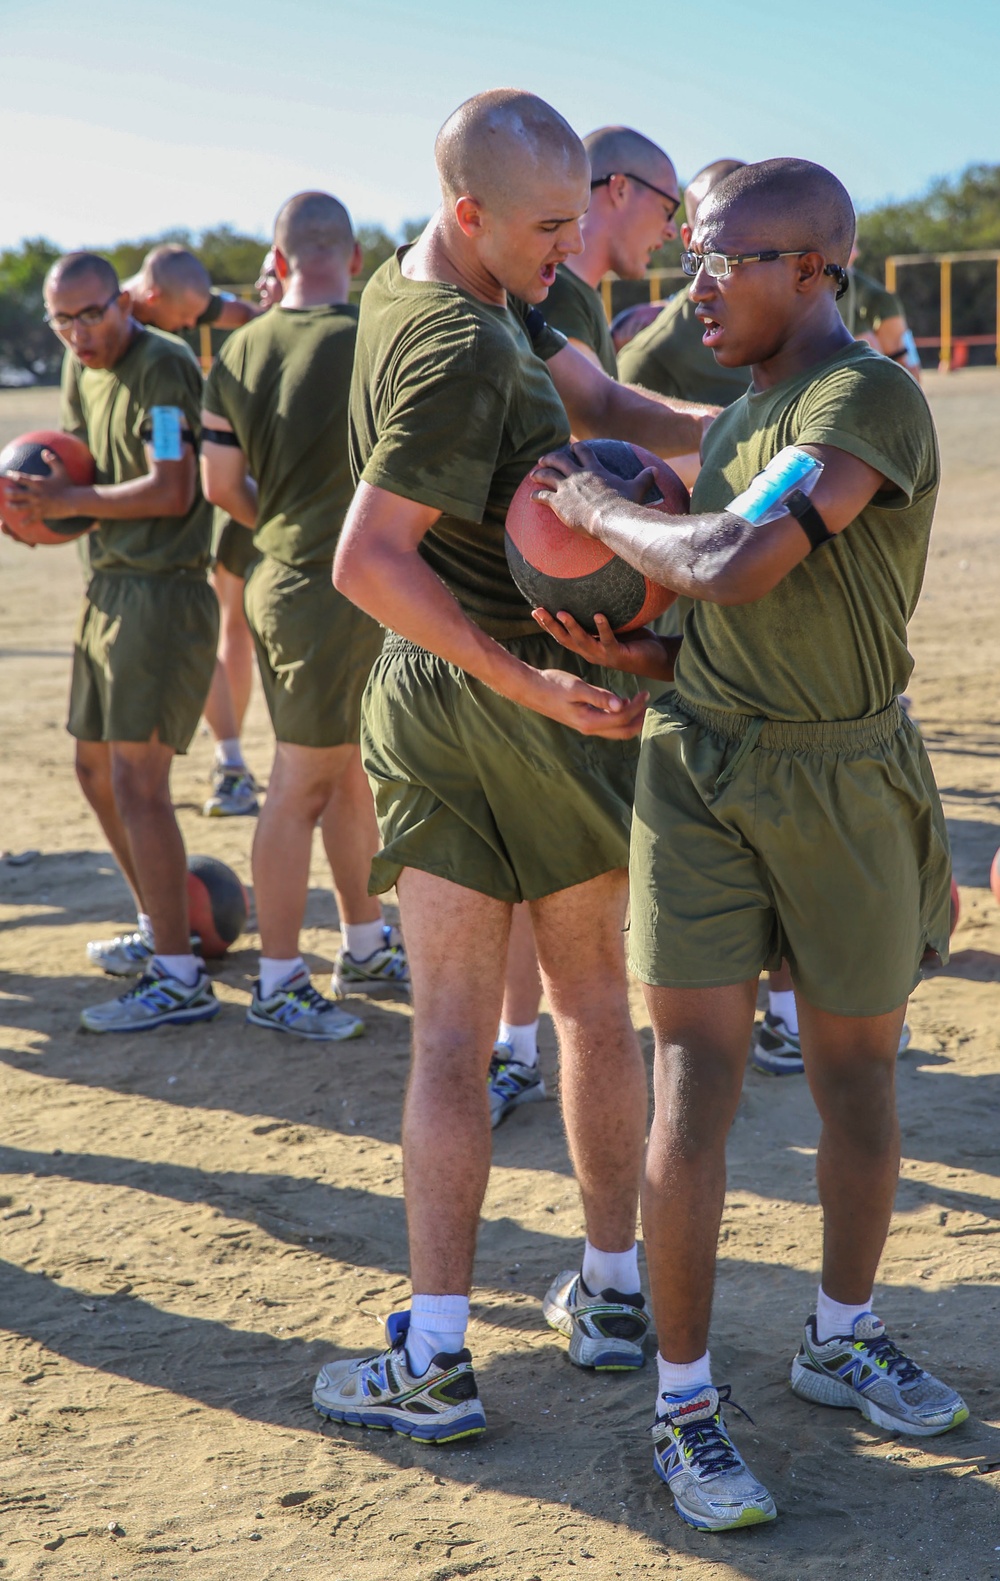 Endurance is tested for the recruits of Mike Company